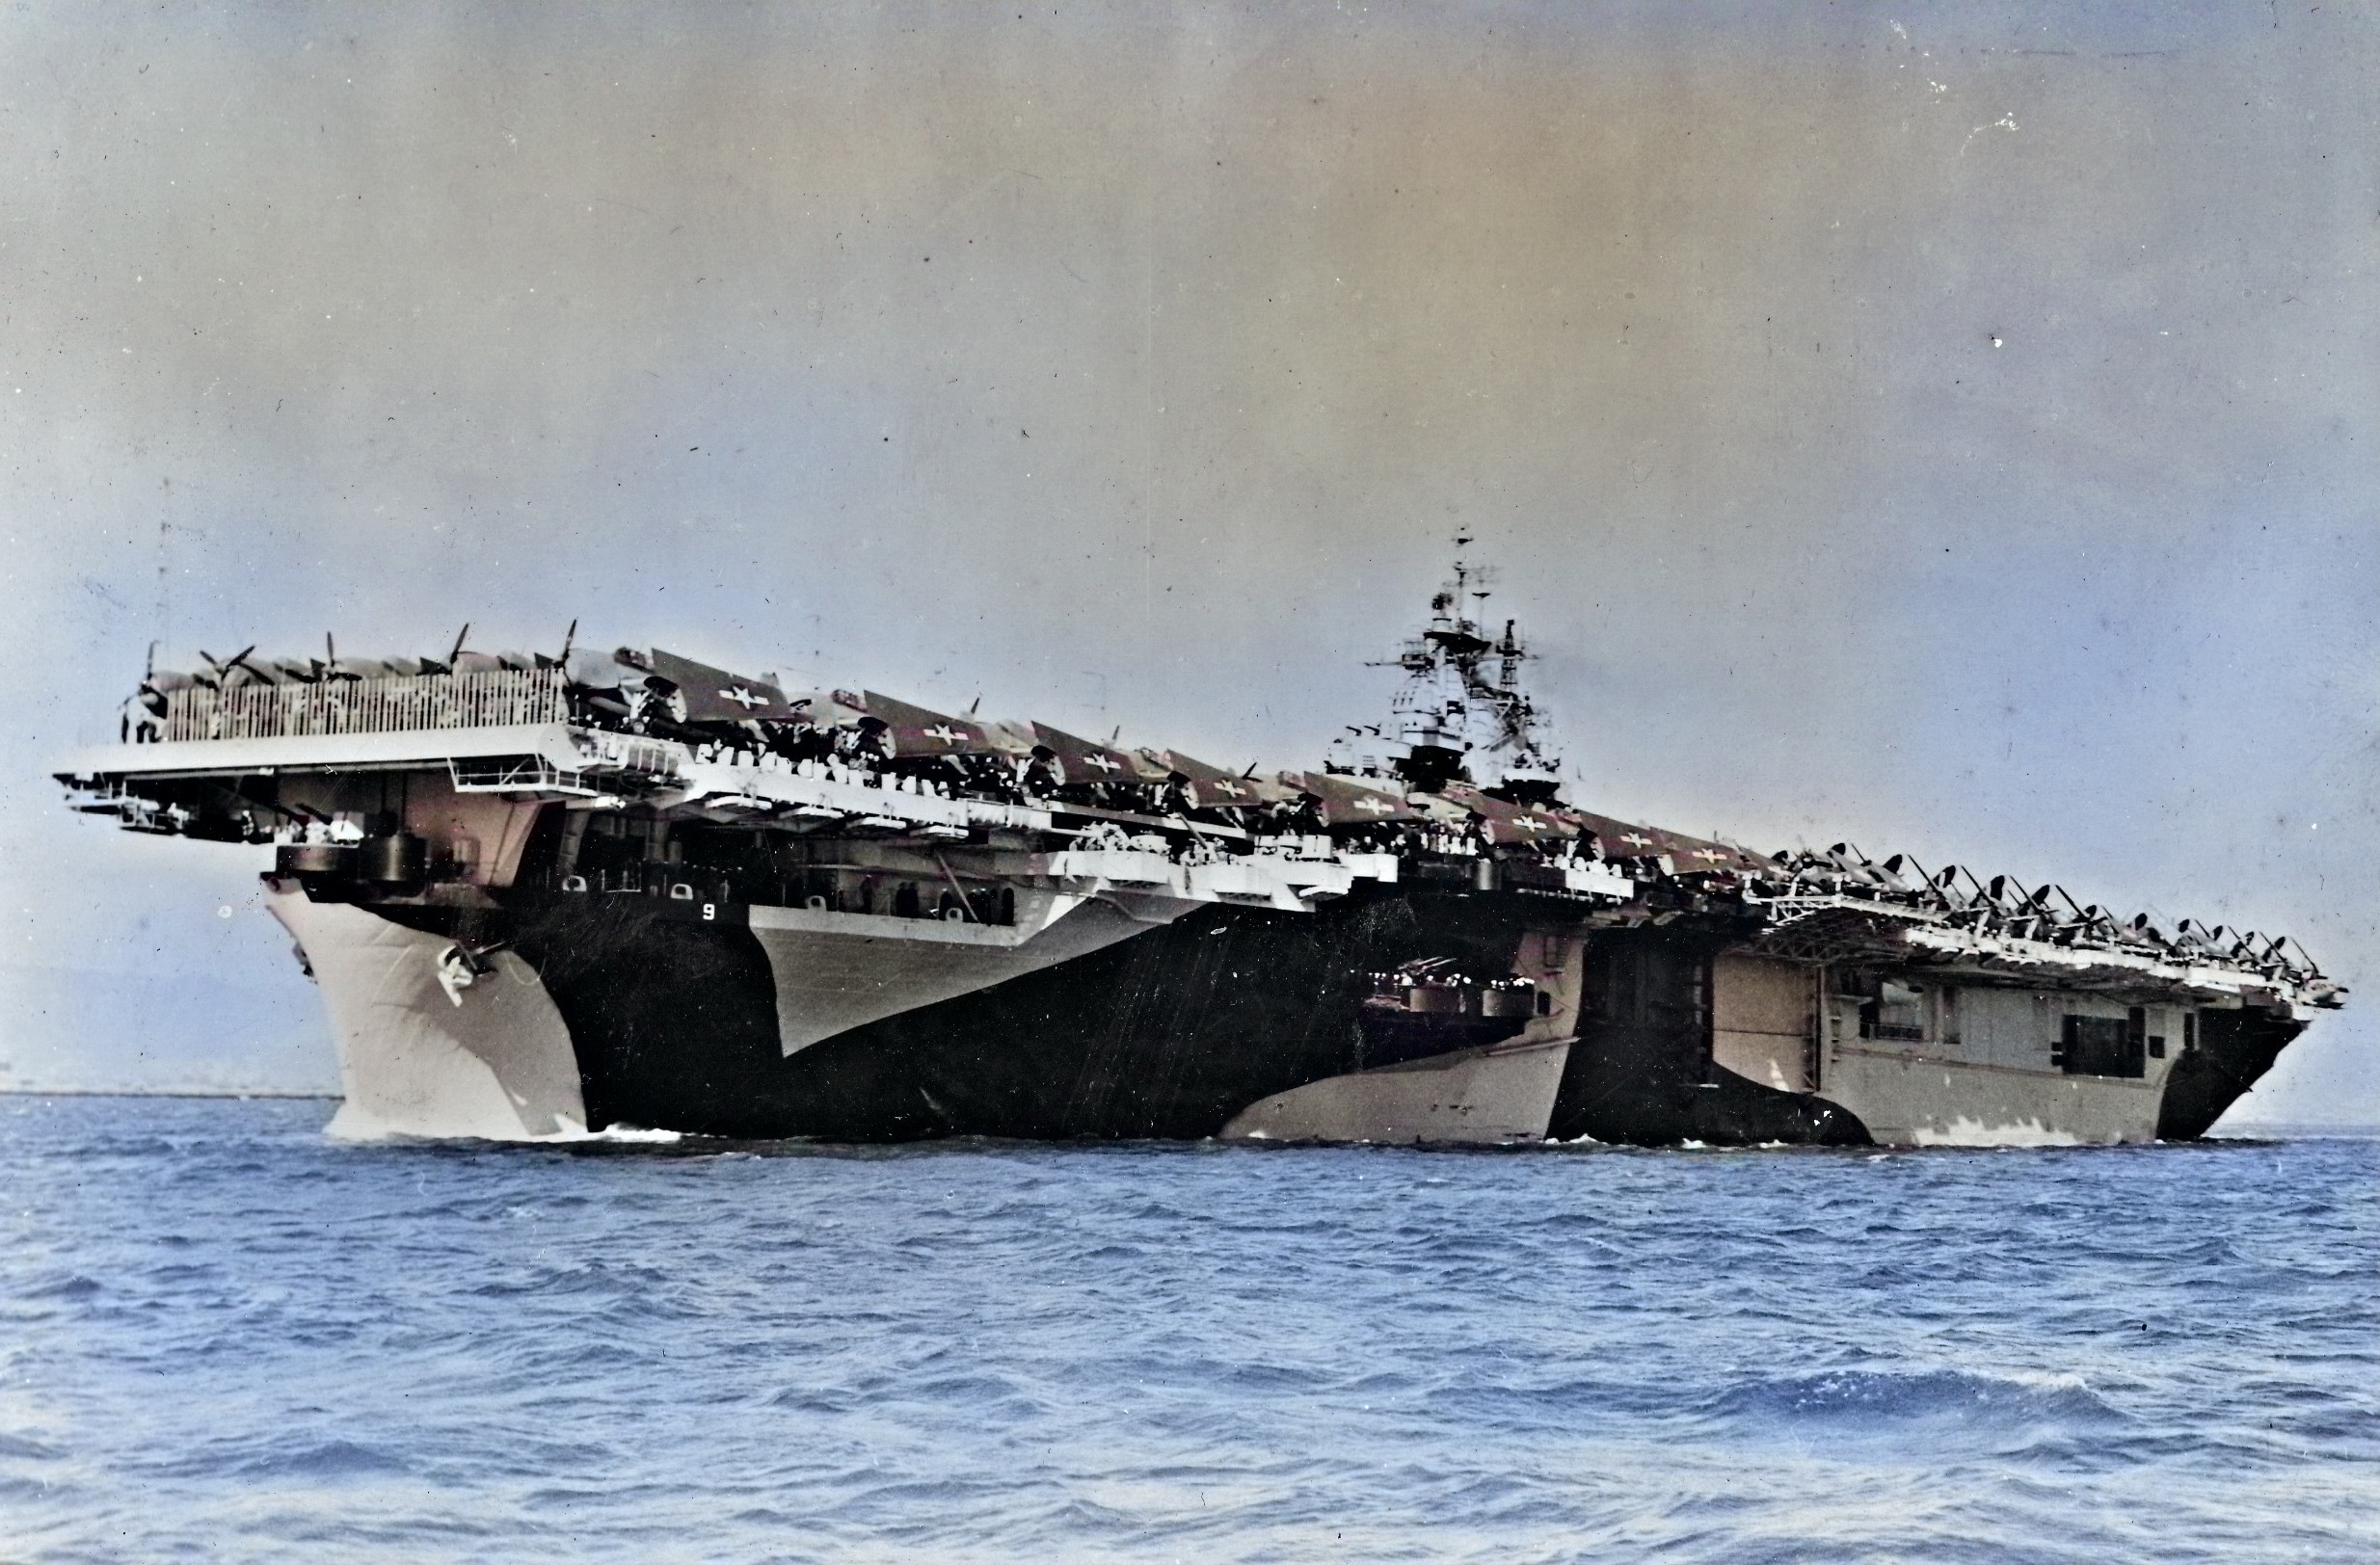 USS Essex departing San Francisco Naval Shipyard, California, United States, 15 Apr 1944, photo 2 of 4; note camouflage measure 32 design 6/10D [Colorized by WW2DB]